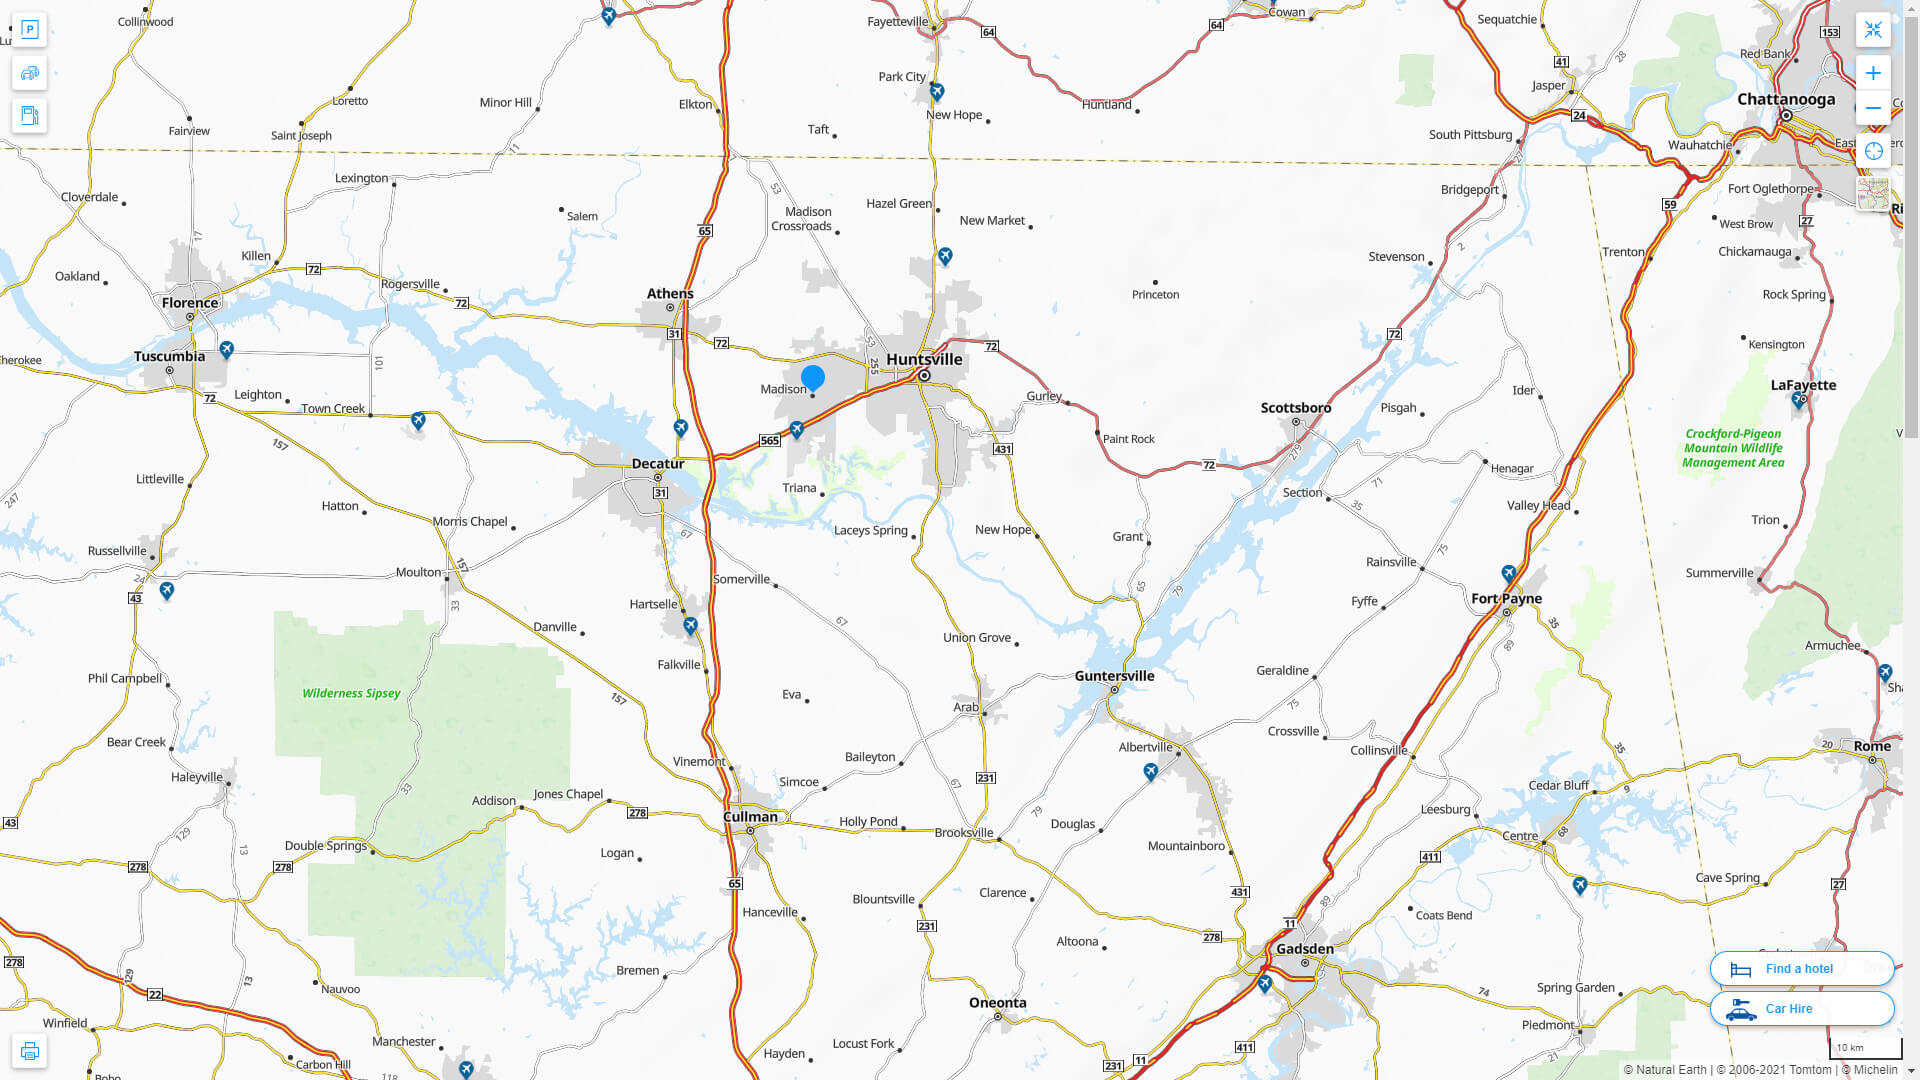 Interstate Highway Map of Madison in Alabama